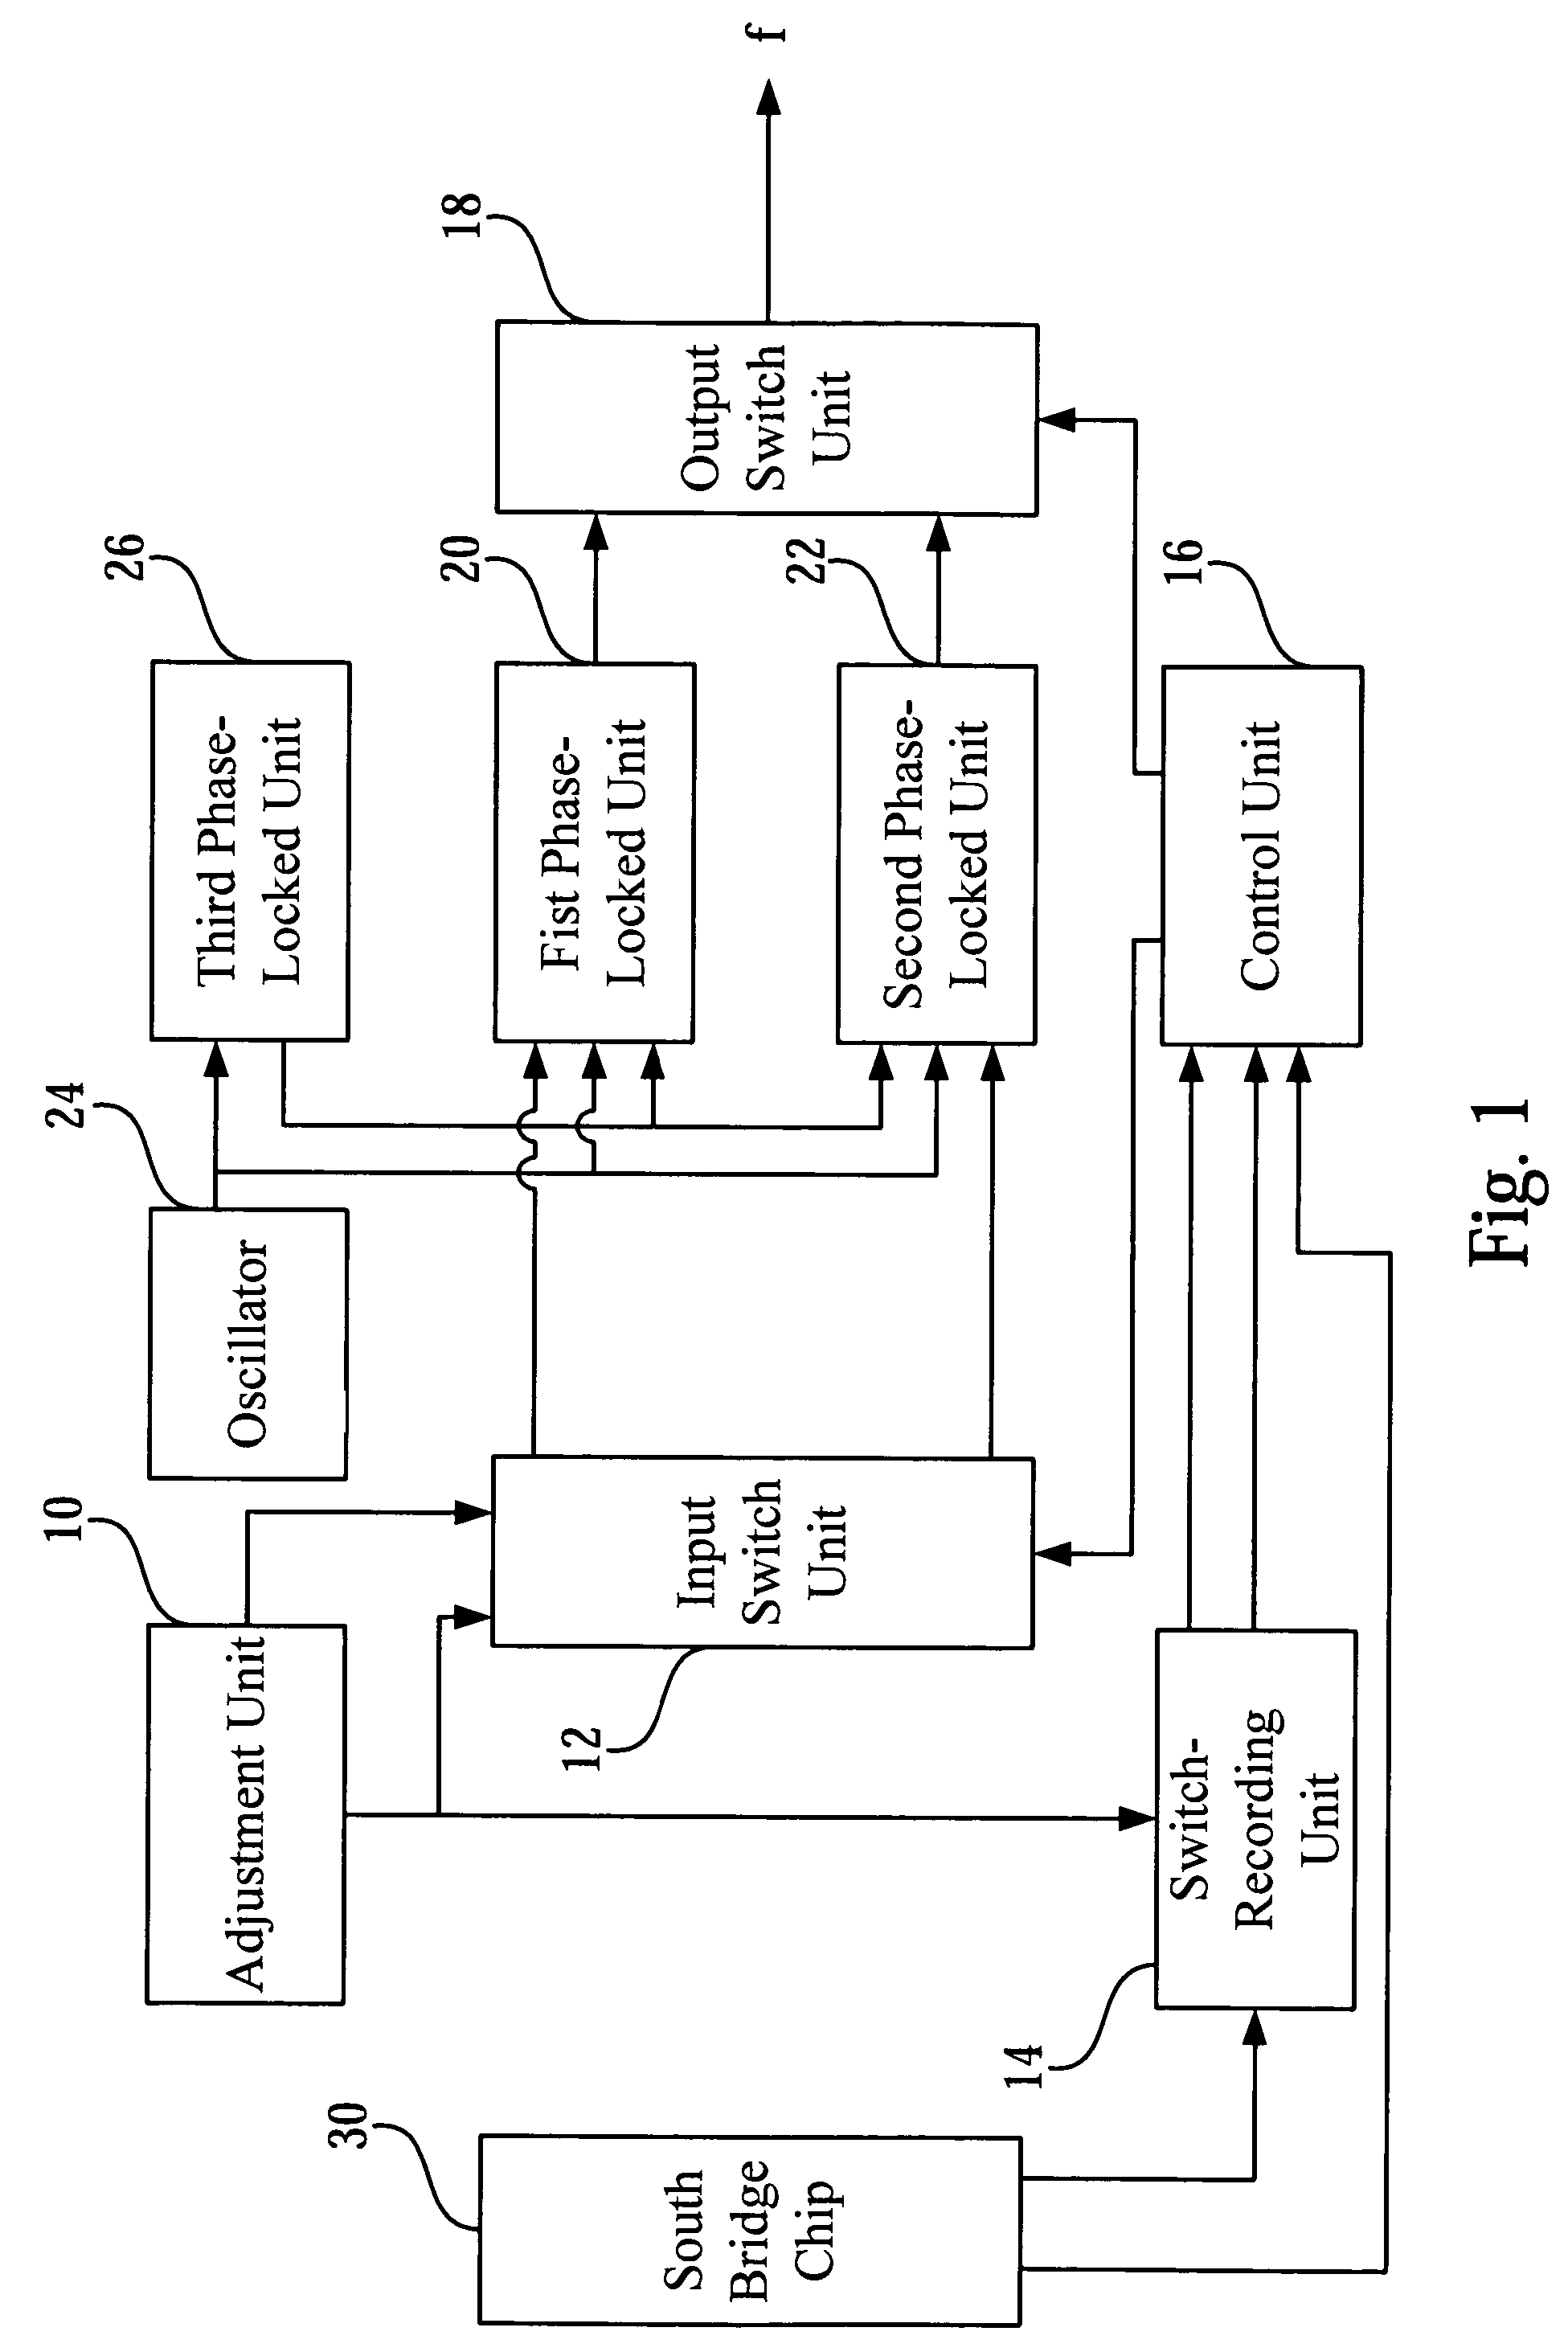 Switching circuit and method thereof for dynamically switching host clock signals